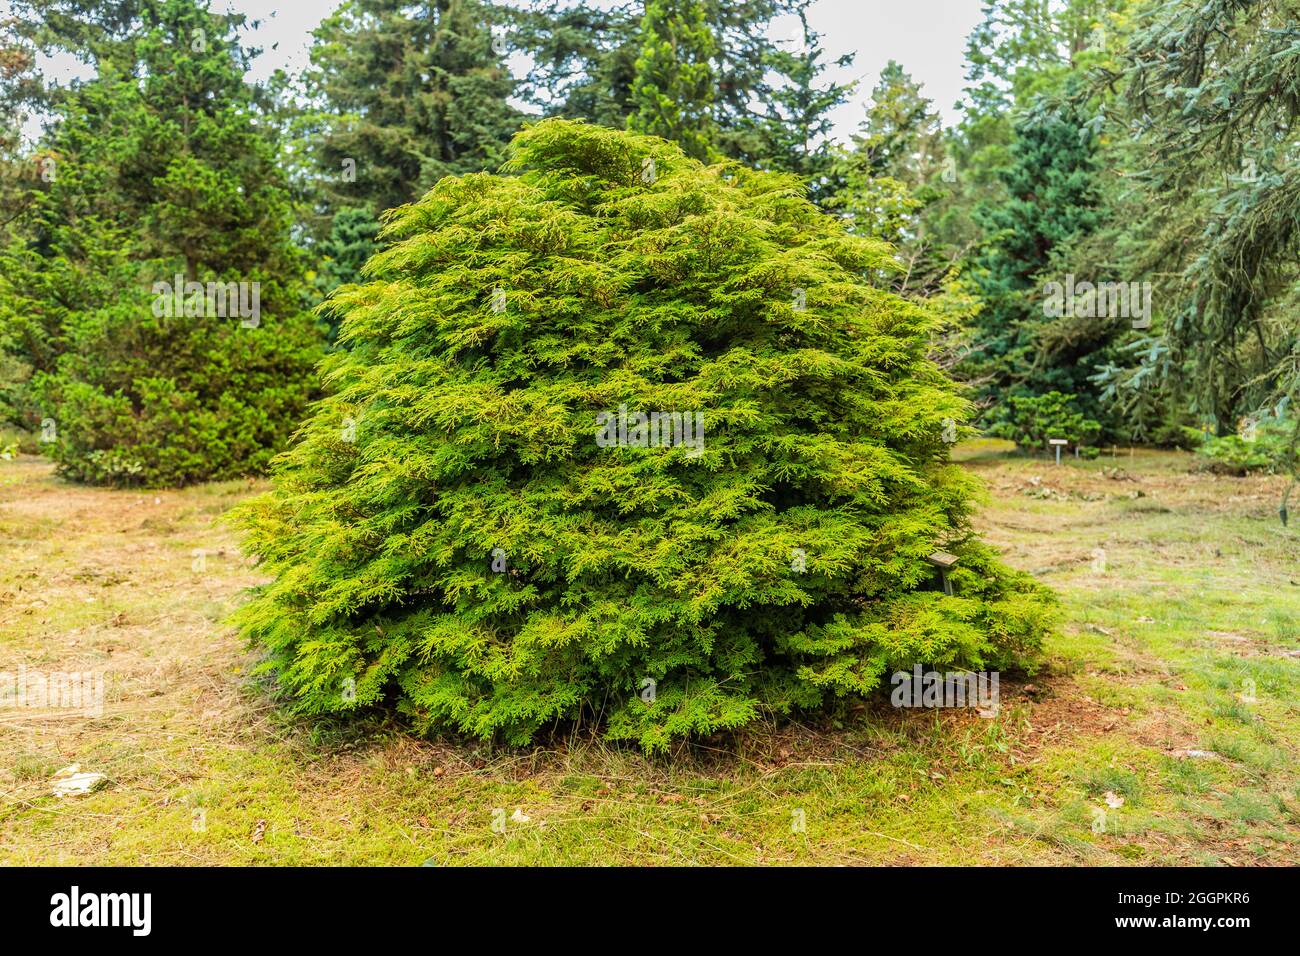 Solitaire Hinoki cypress or Japanese cypress, Chamaecyparis obtusa, native to central Japan and this specimen is in pinetum Ter Borgh Stock Photo